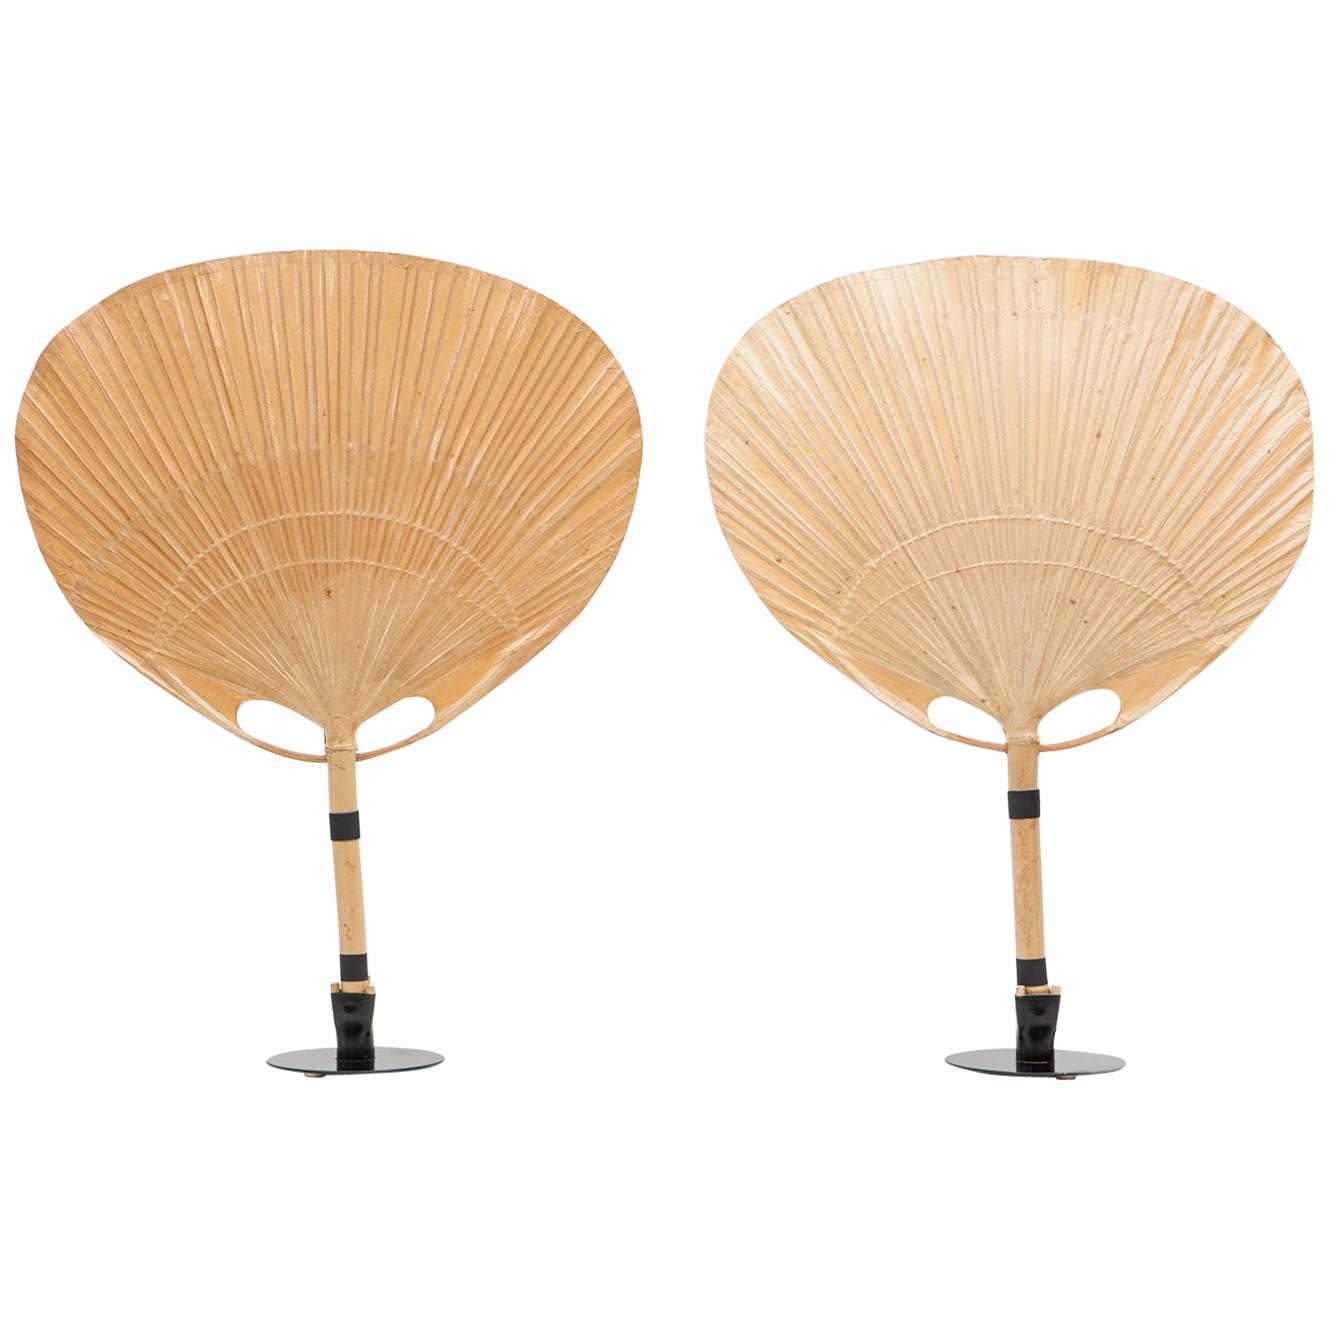 1970s Paper, Bamboo and Metal Table Lamps by Ingo Maurer